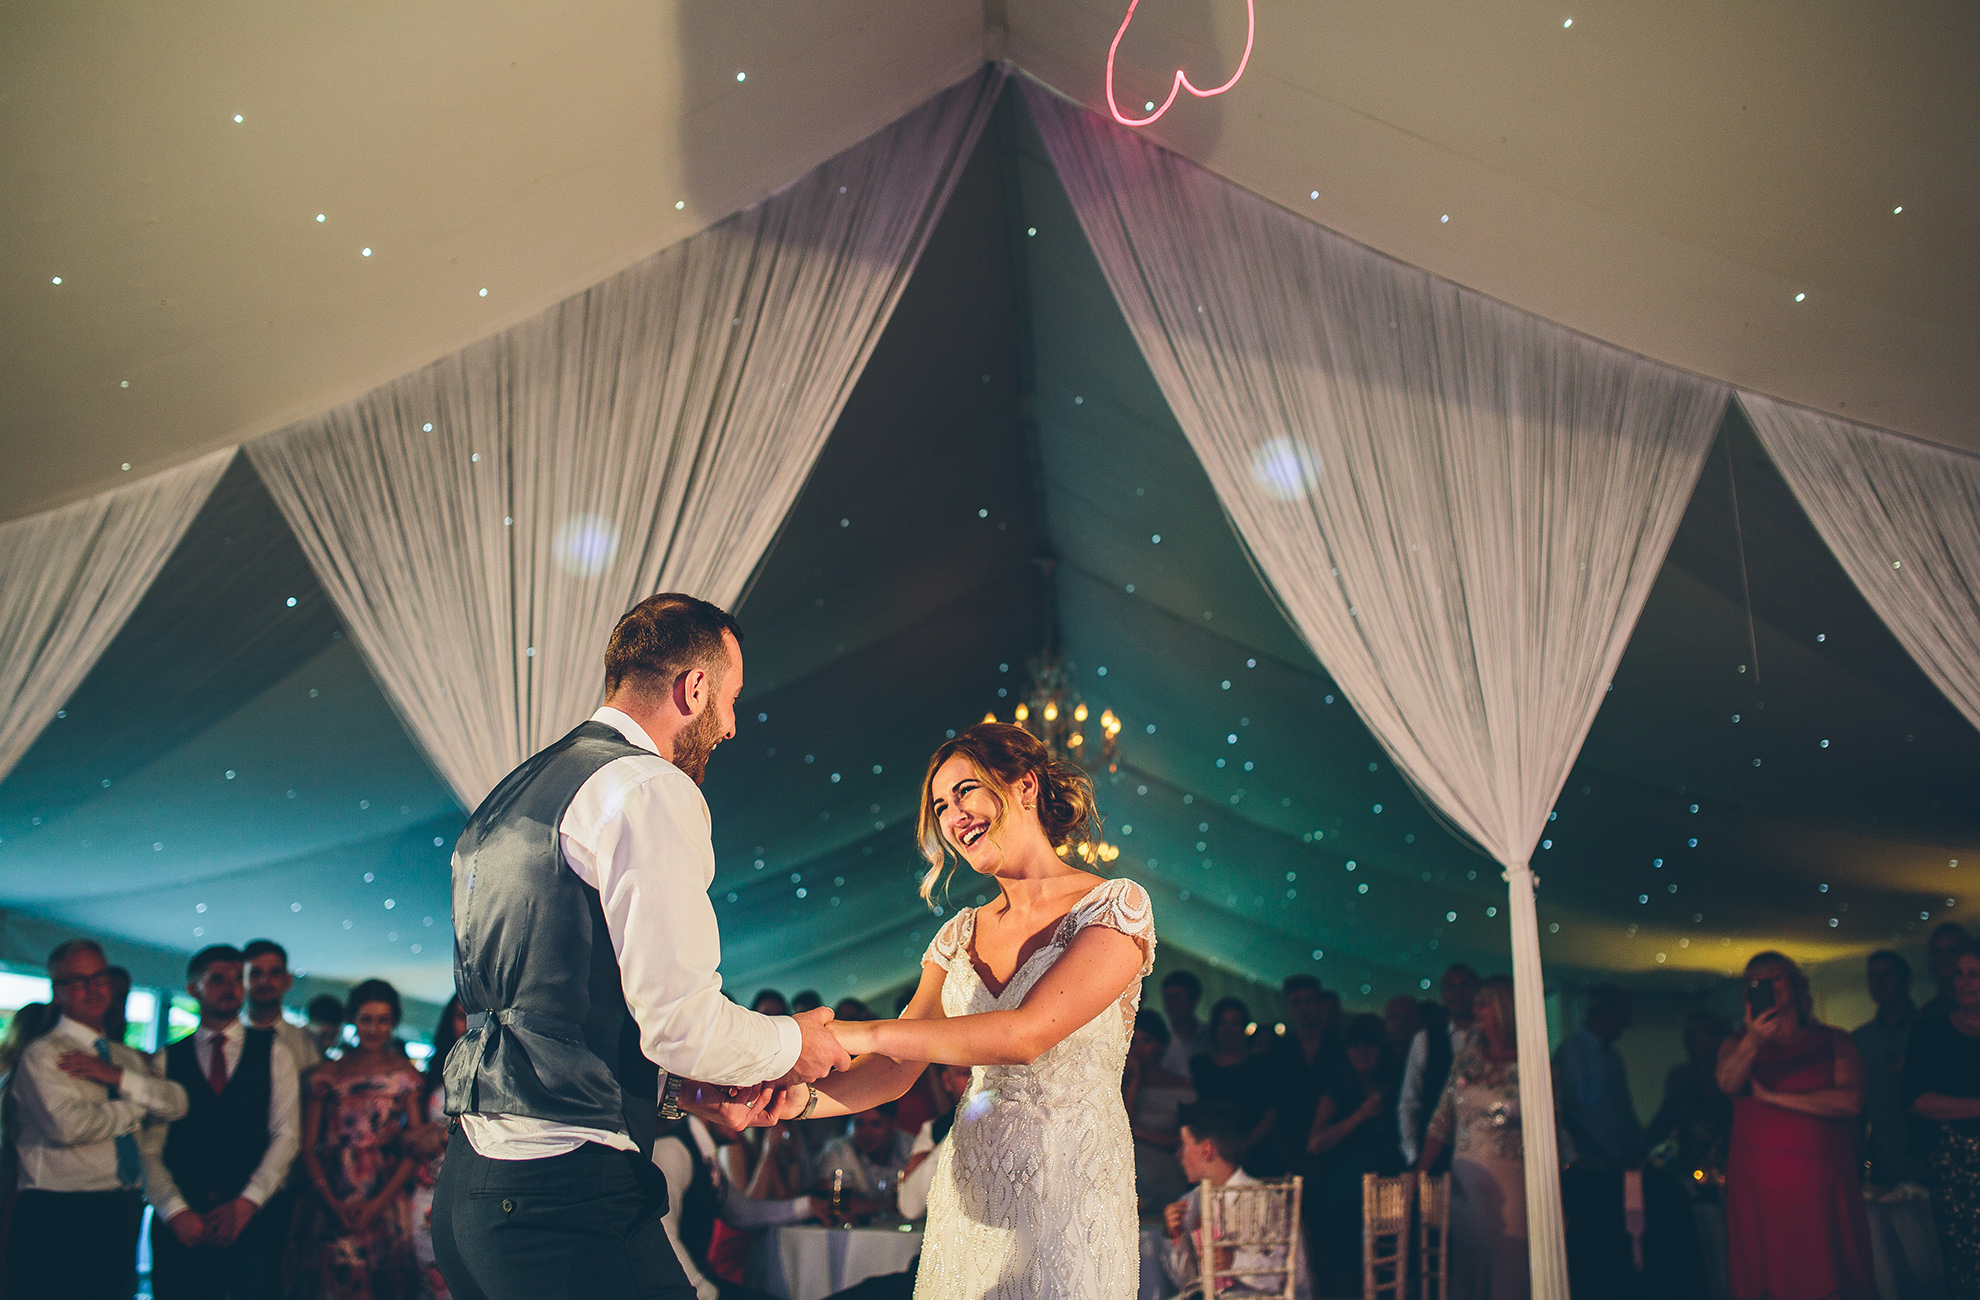 A bride and groom perform their first dance in front of guests in the Pavillion at Combermere Abbey